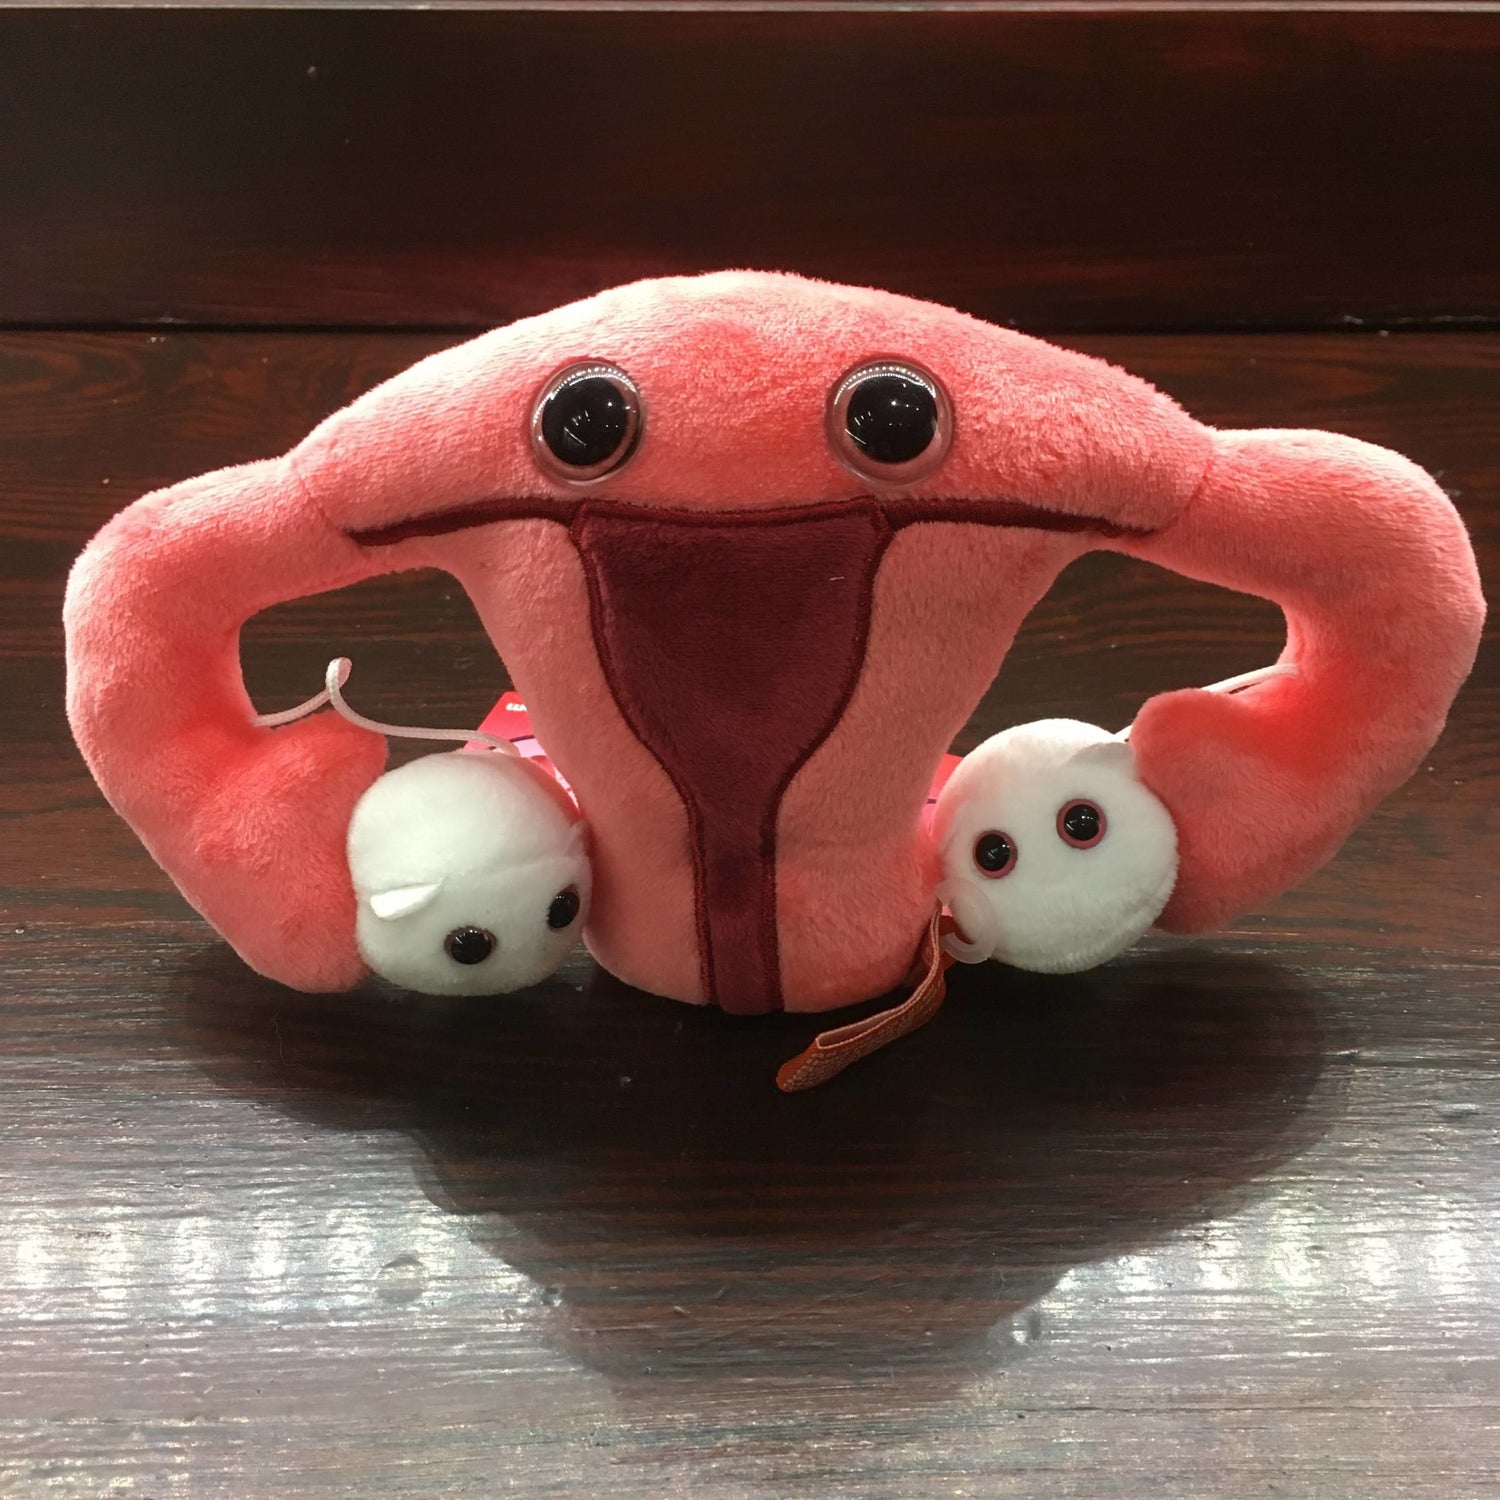 Pink plush toy in the shape of a uterus with white egg cells